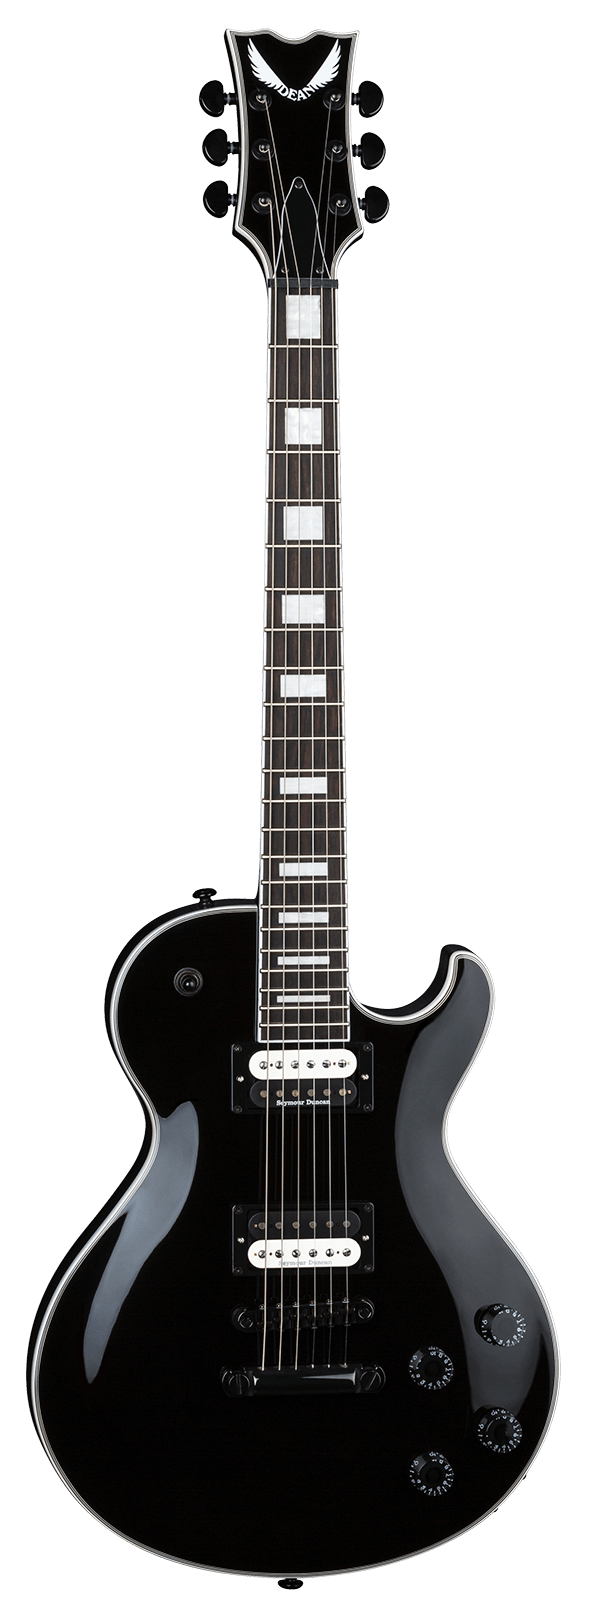 Dean Thoroughbred Select Electric Guitar – Classic Black